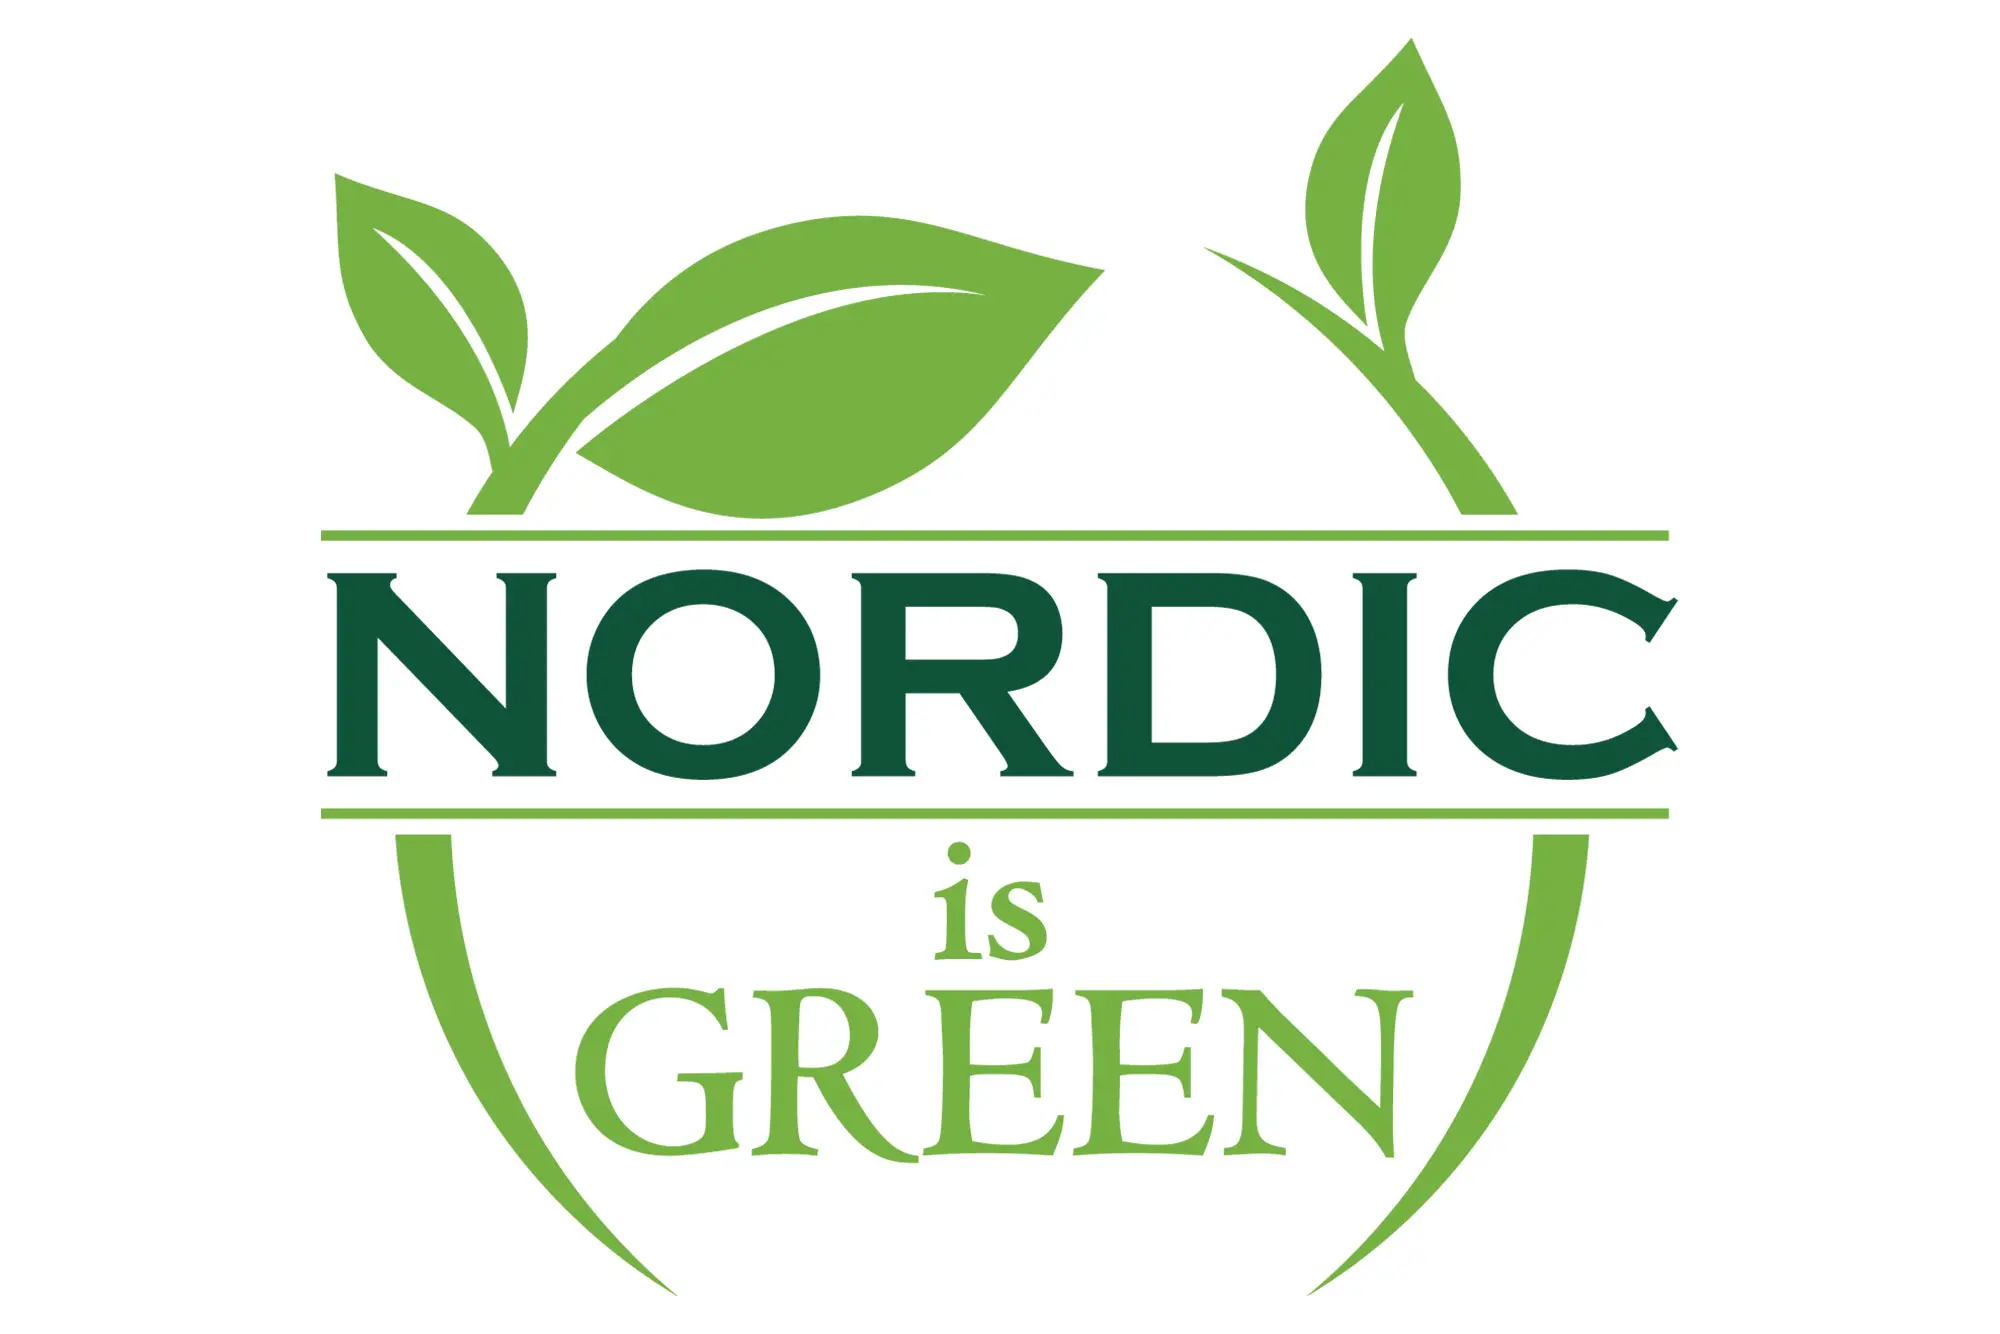 Nordic is green